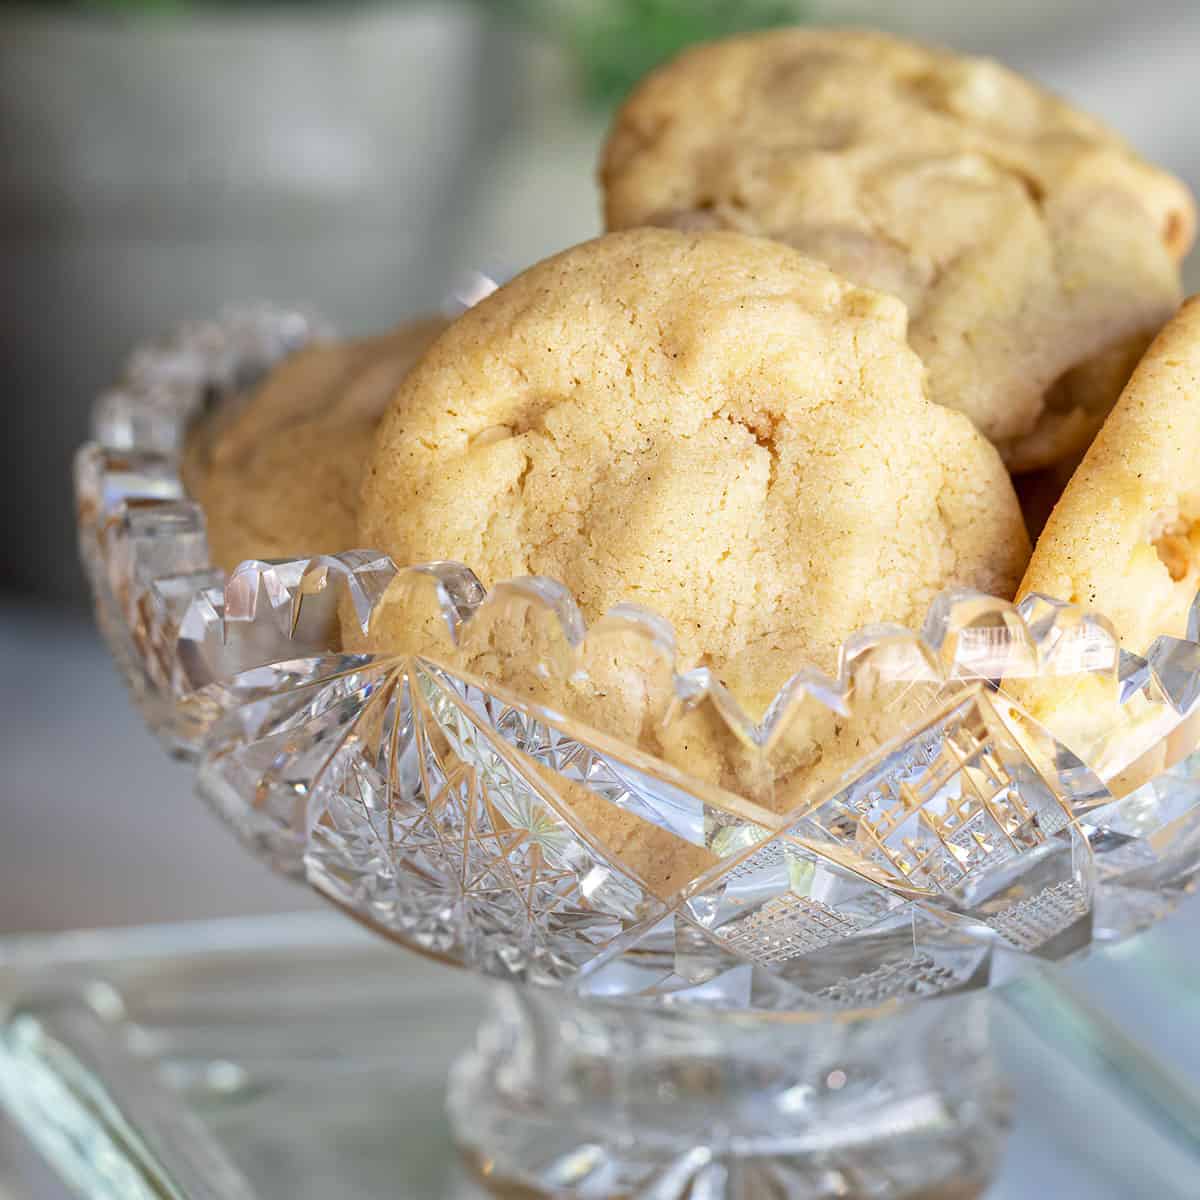 Caramel Pear with almond cookies in a cut-glass bowl.